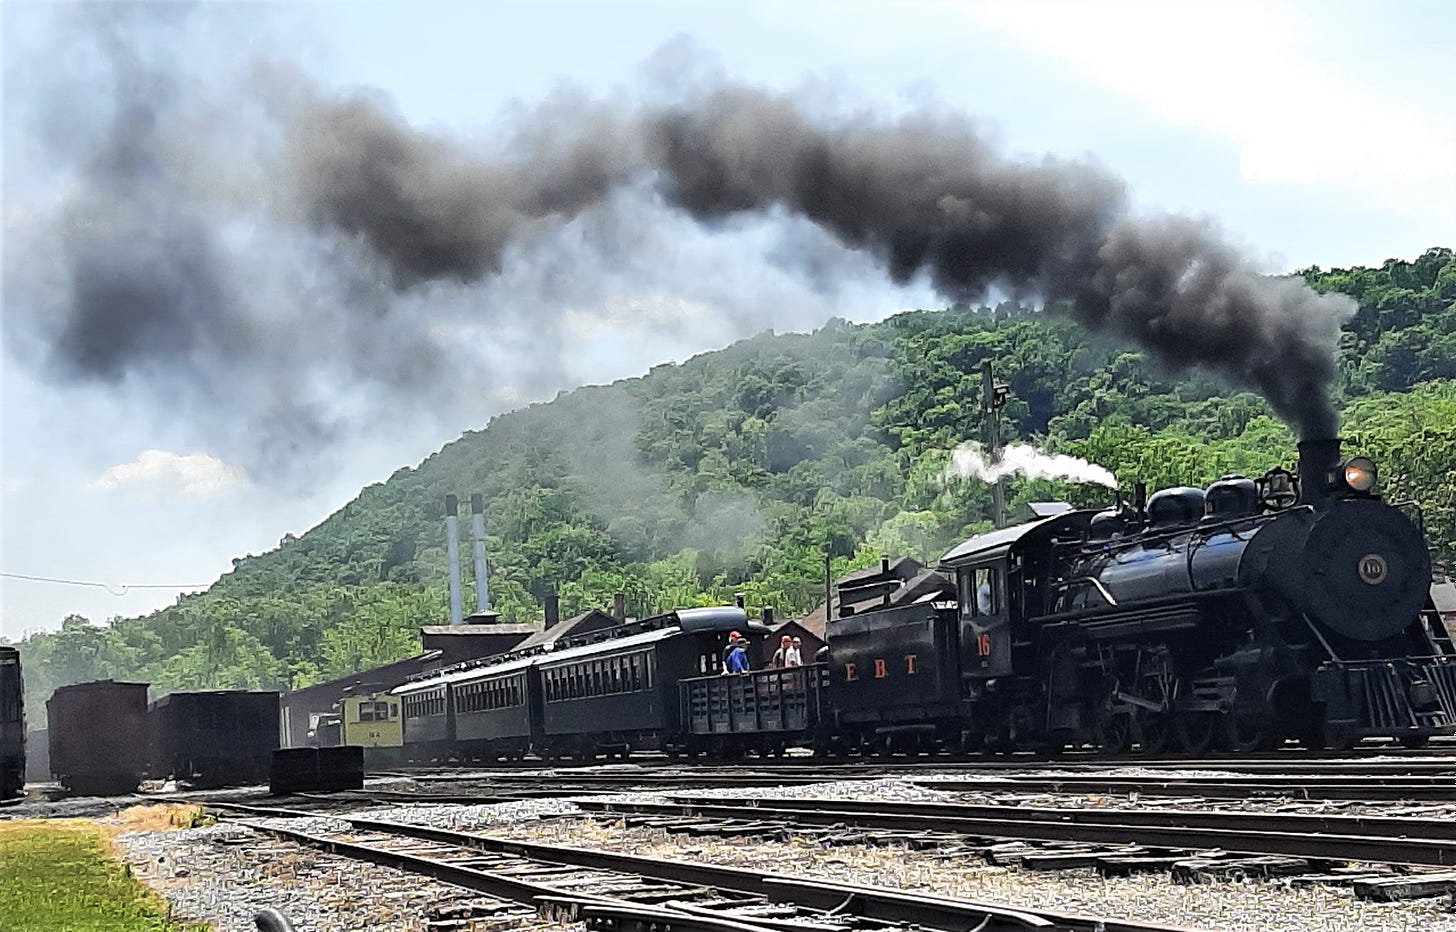 Black steam engine with black smoke pouring out, pulling train cars.